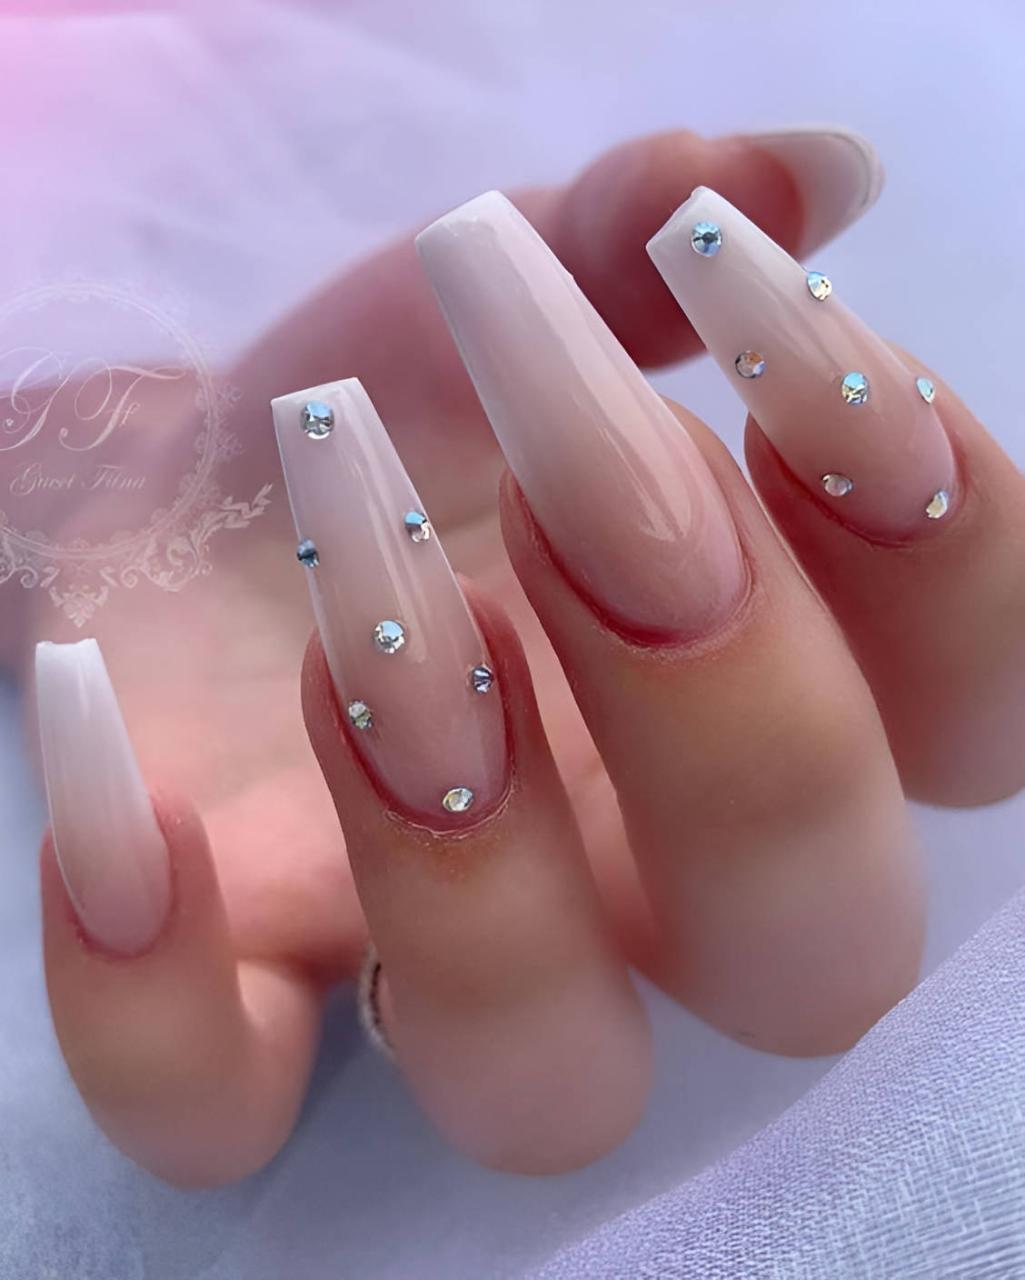 30 Stunning Square Nail Designs To Vamp Up Your Manicure Game - 231